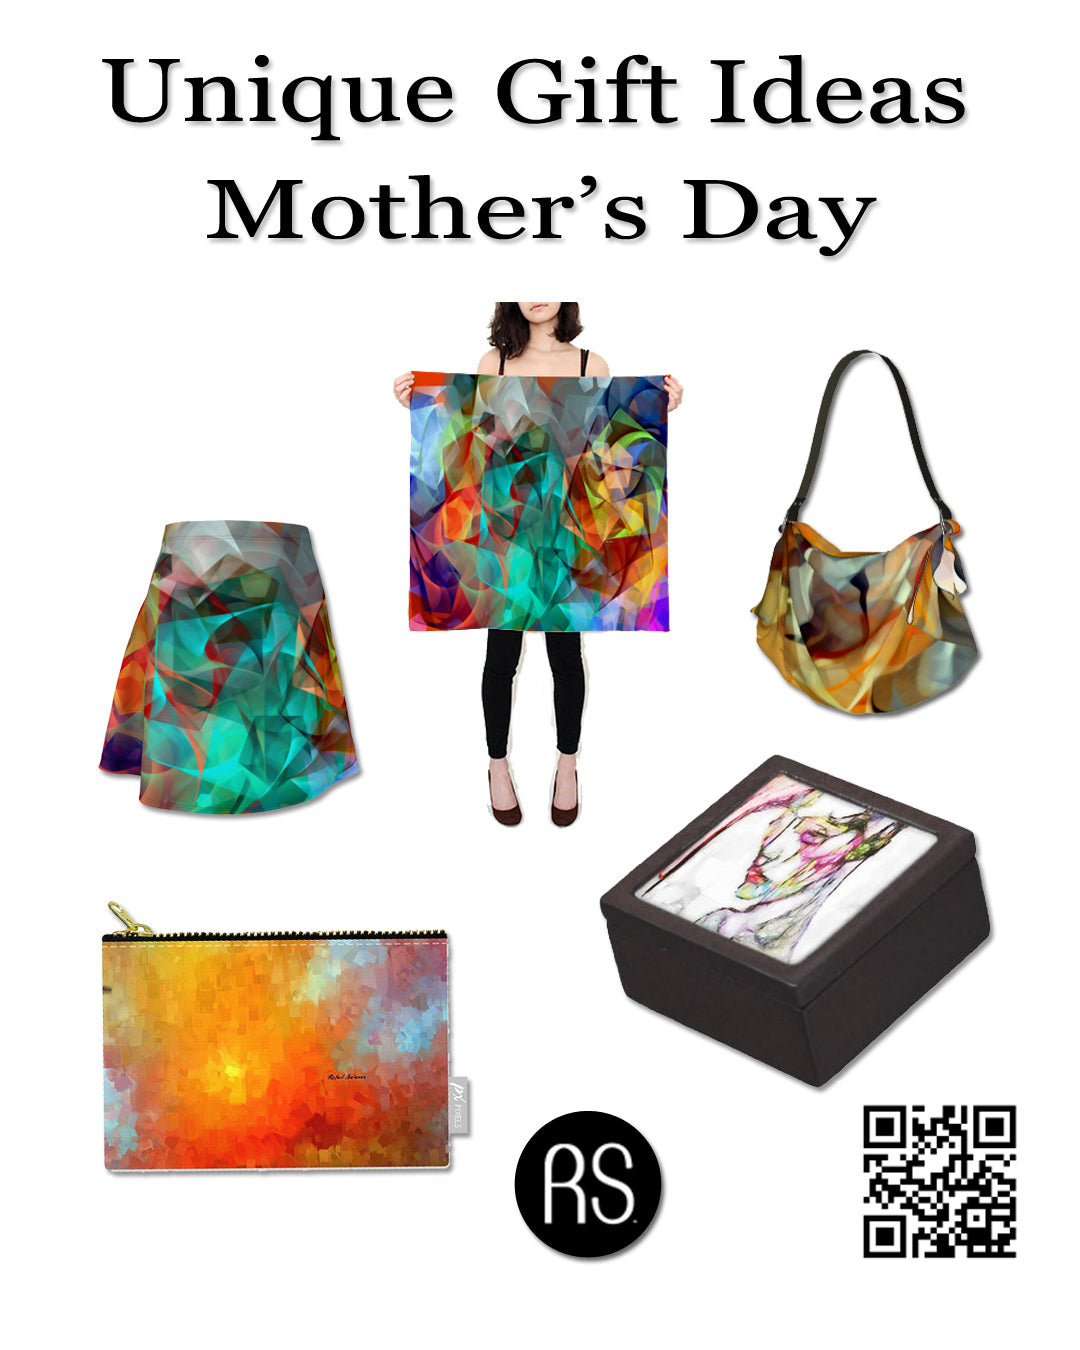 Mother's Day Gift Guide by Rafael Salazar - #Art #AI